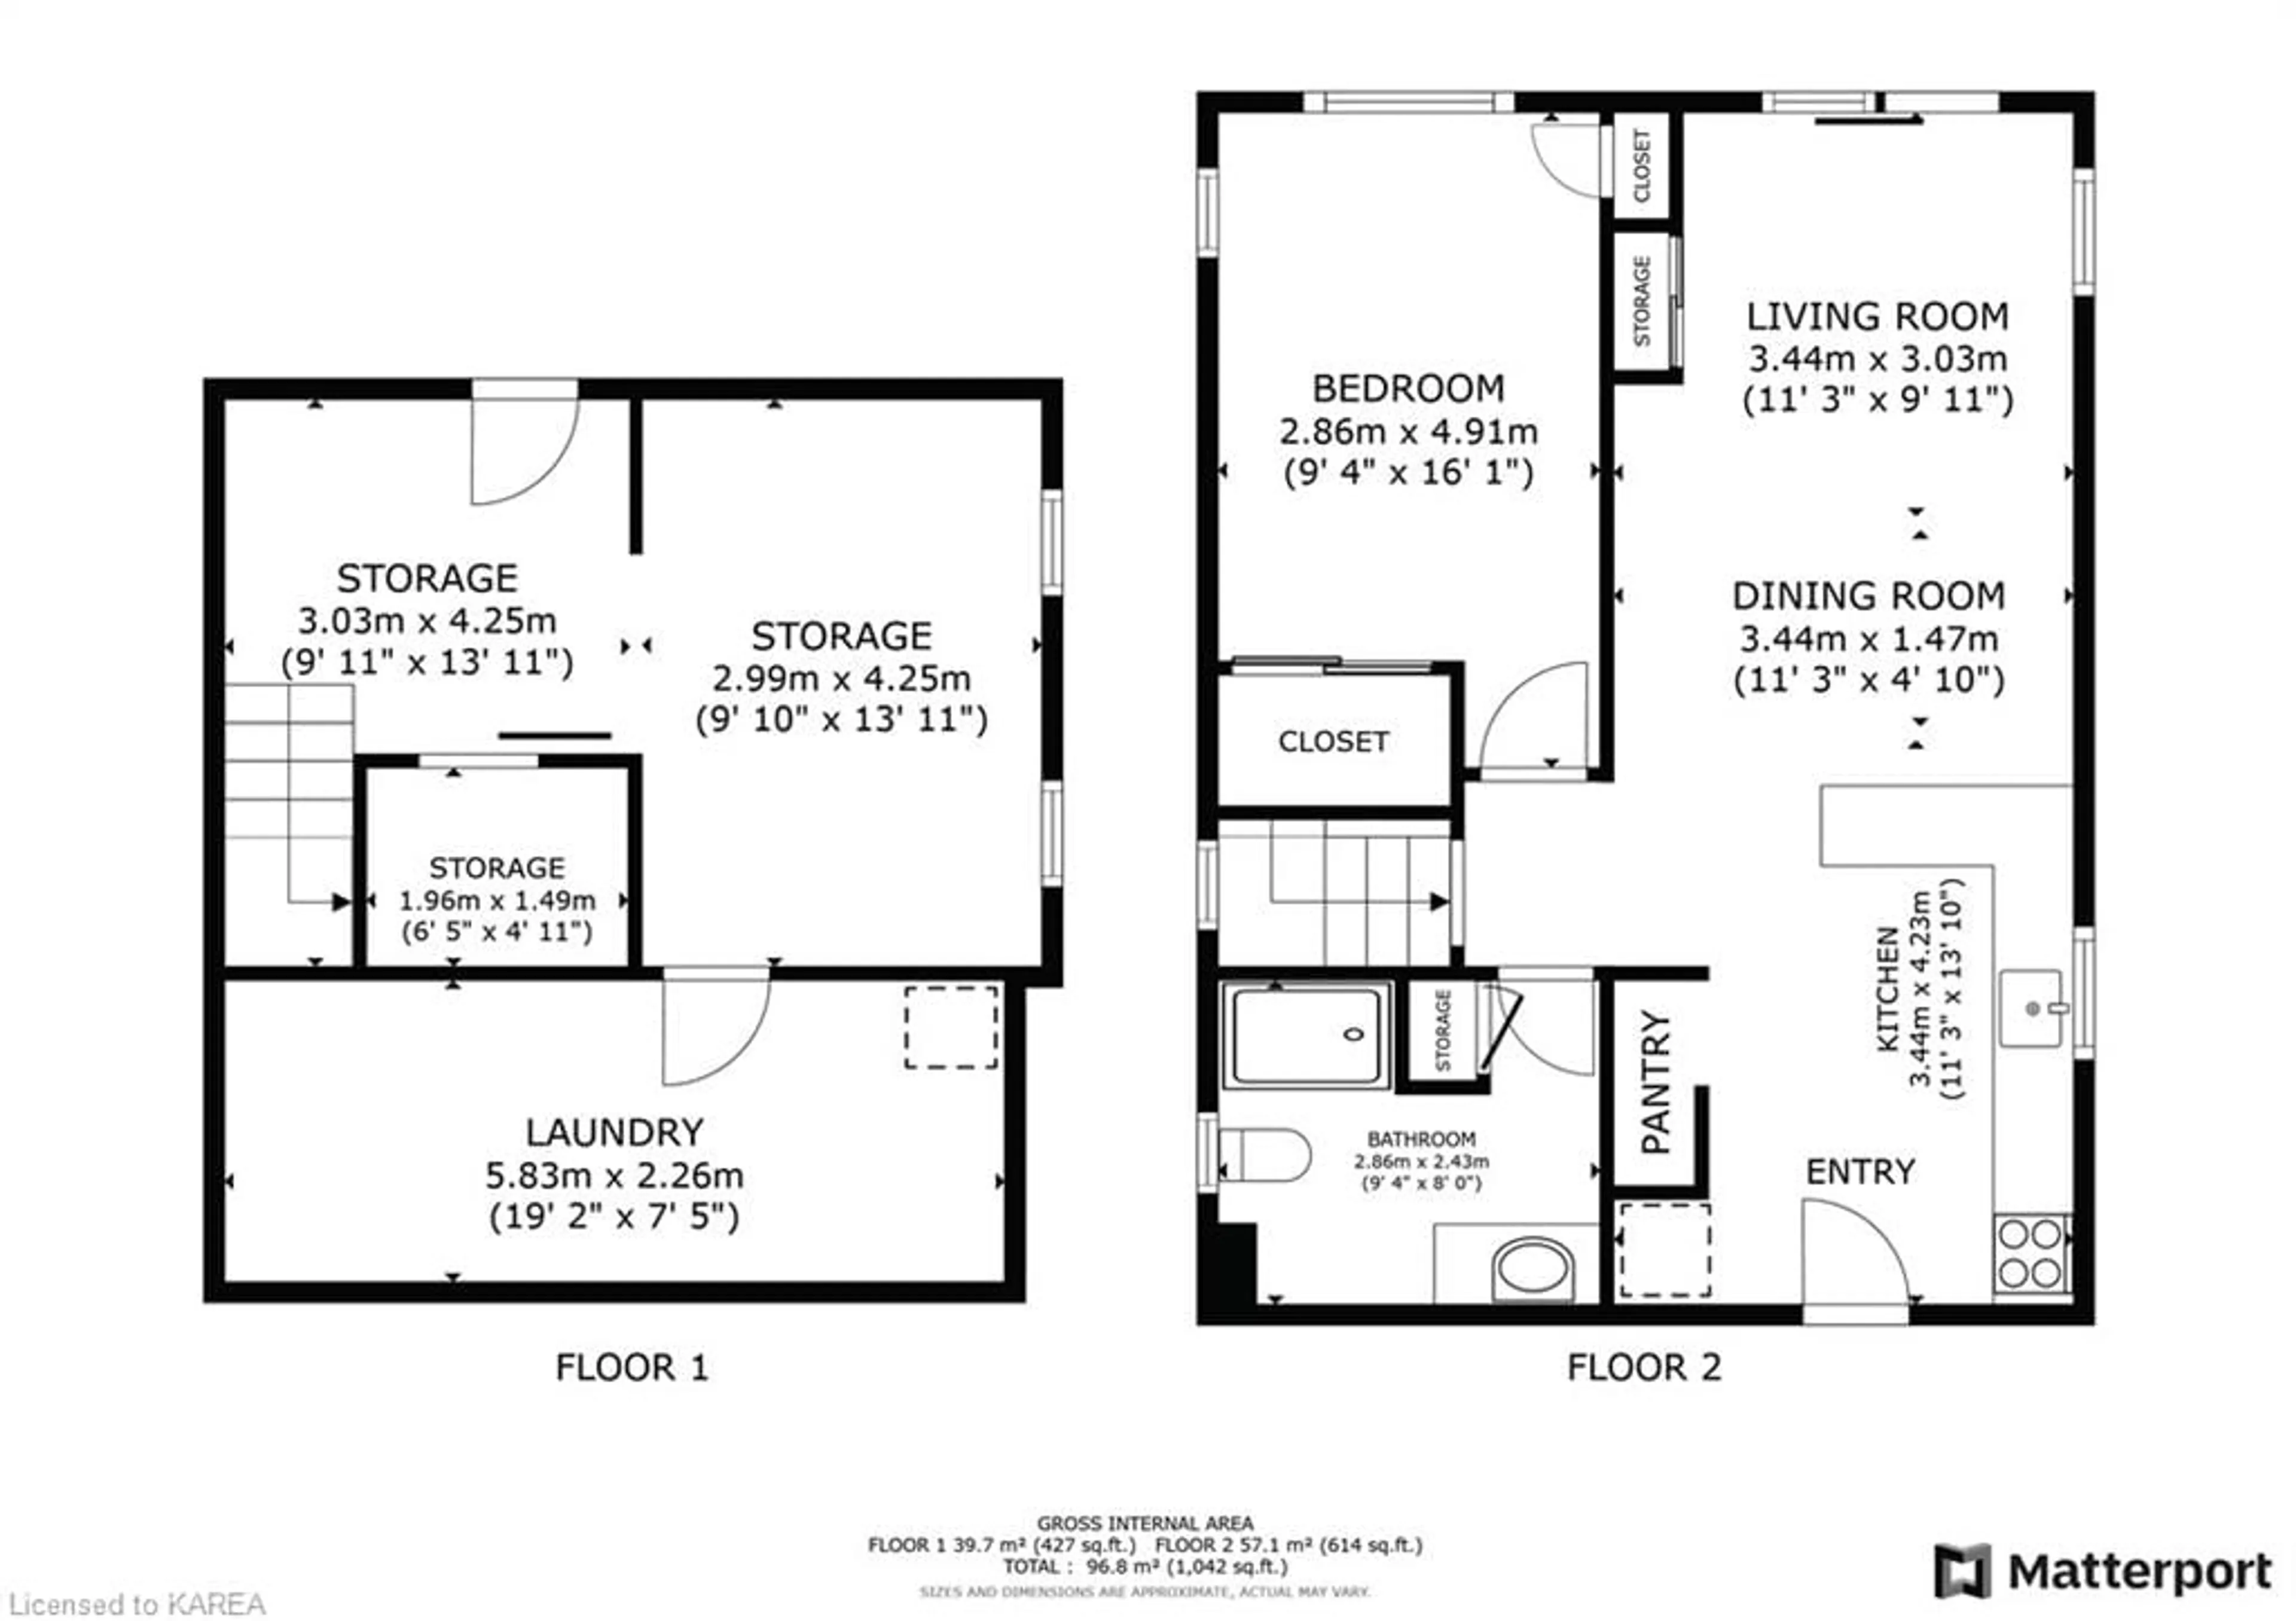 Floor plan for 314 Elphin-Maberly Rd, Maberly Ontario K0H 2B0